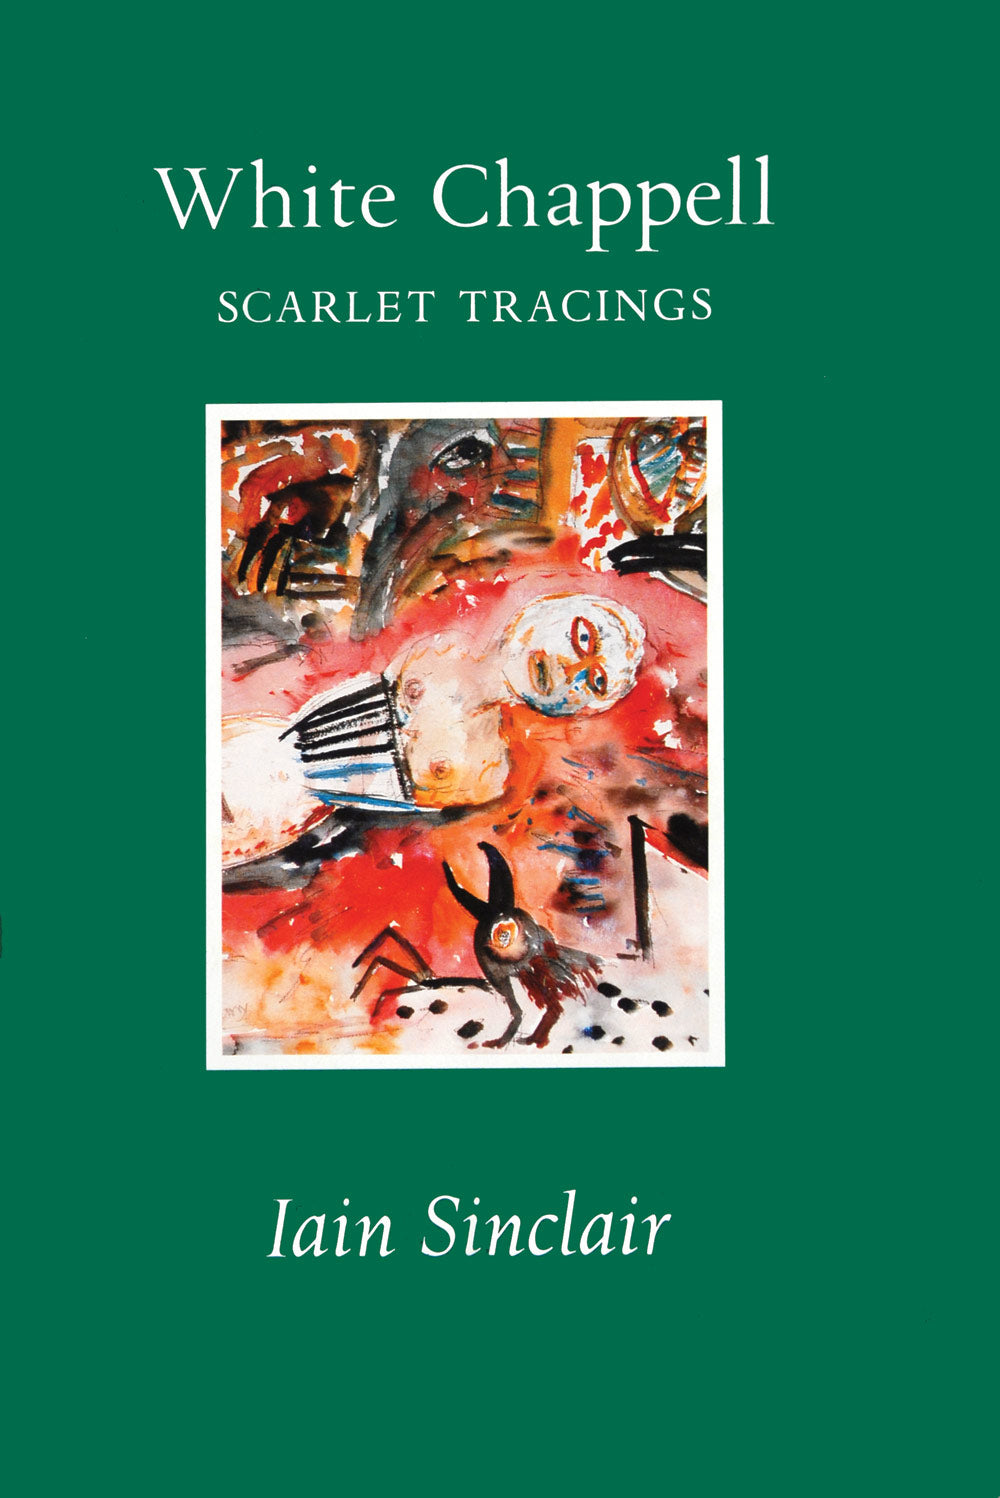 Iain Sinclair - White Chappell Scarlet Tracings